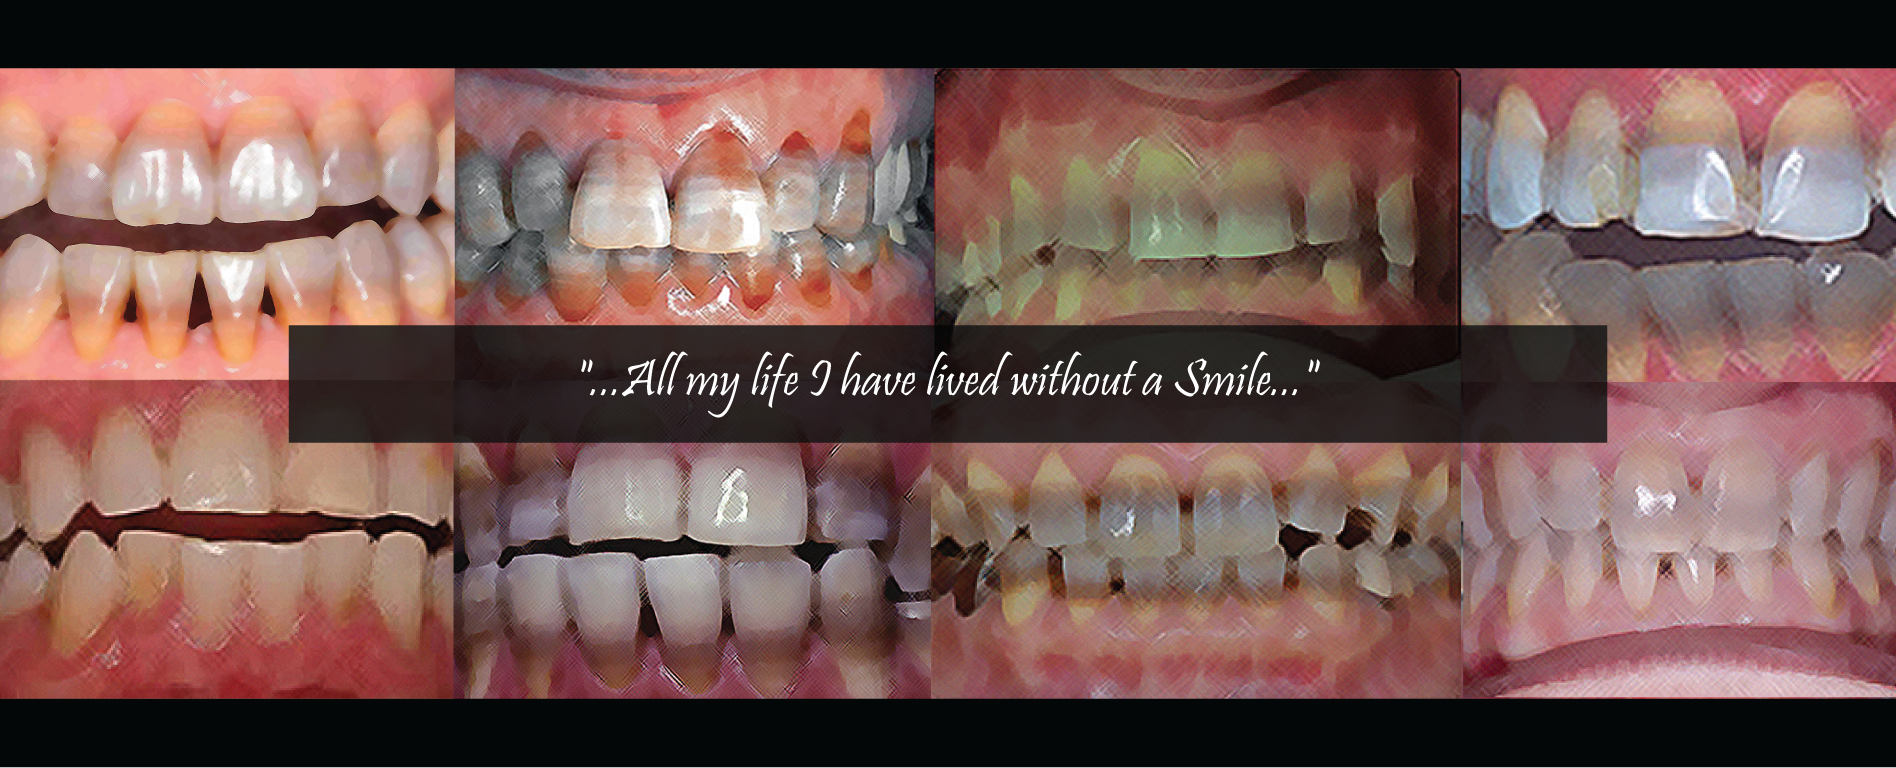 Tetracycline Teeth Staining, Our Impact, Affecting Change, banner with quote